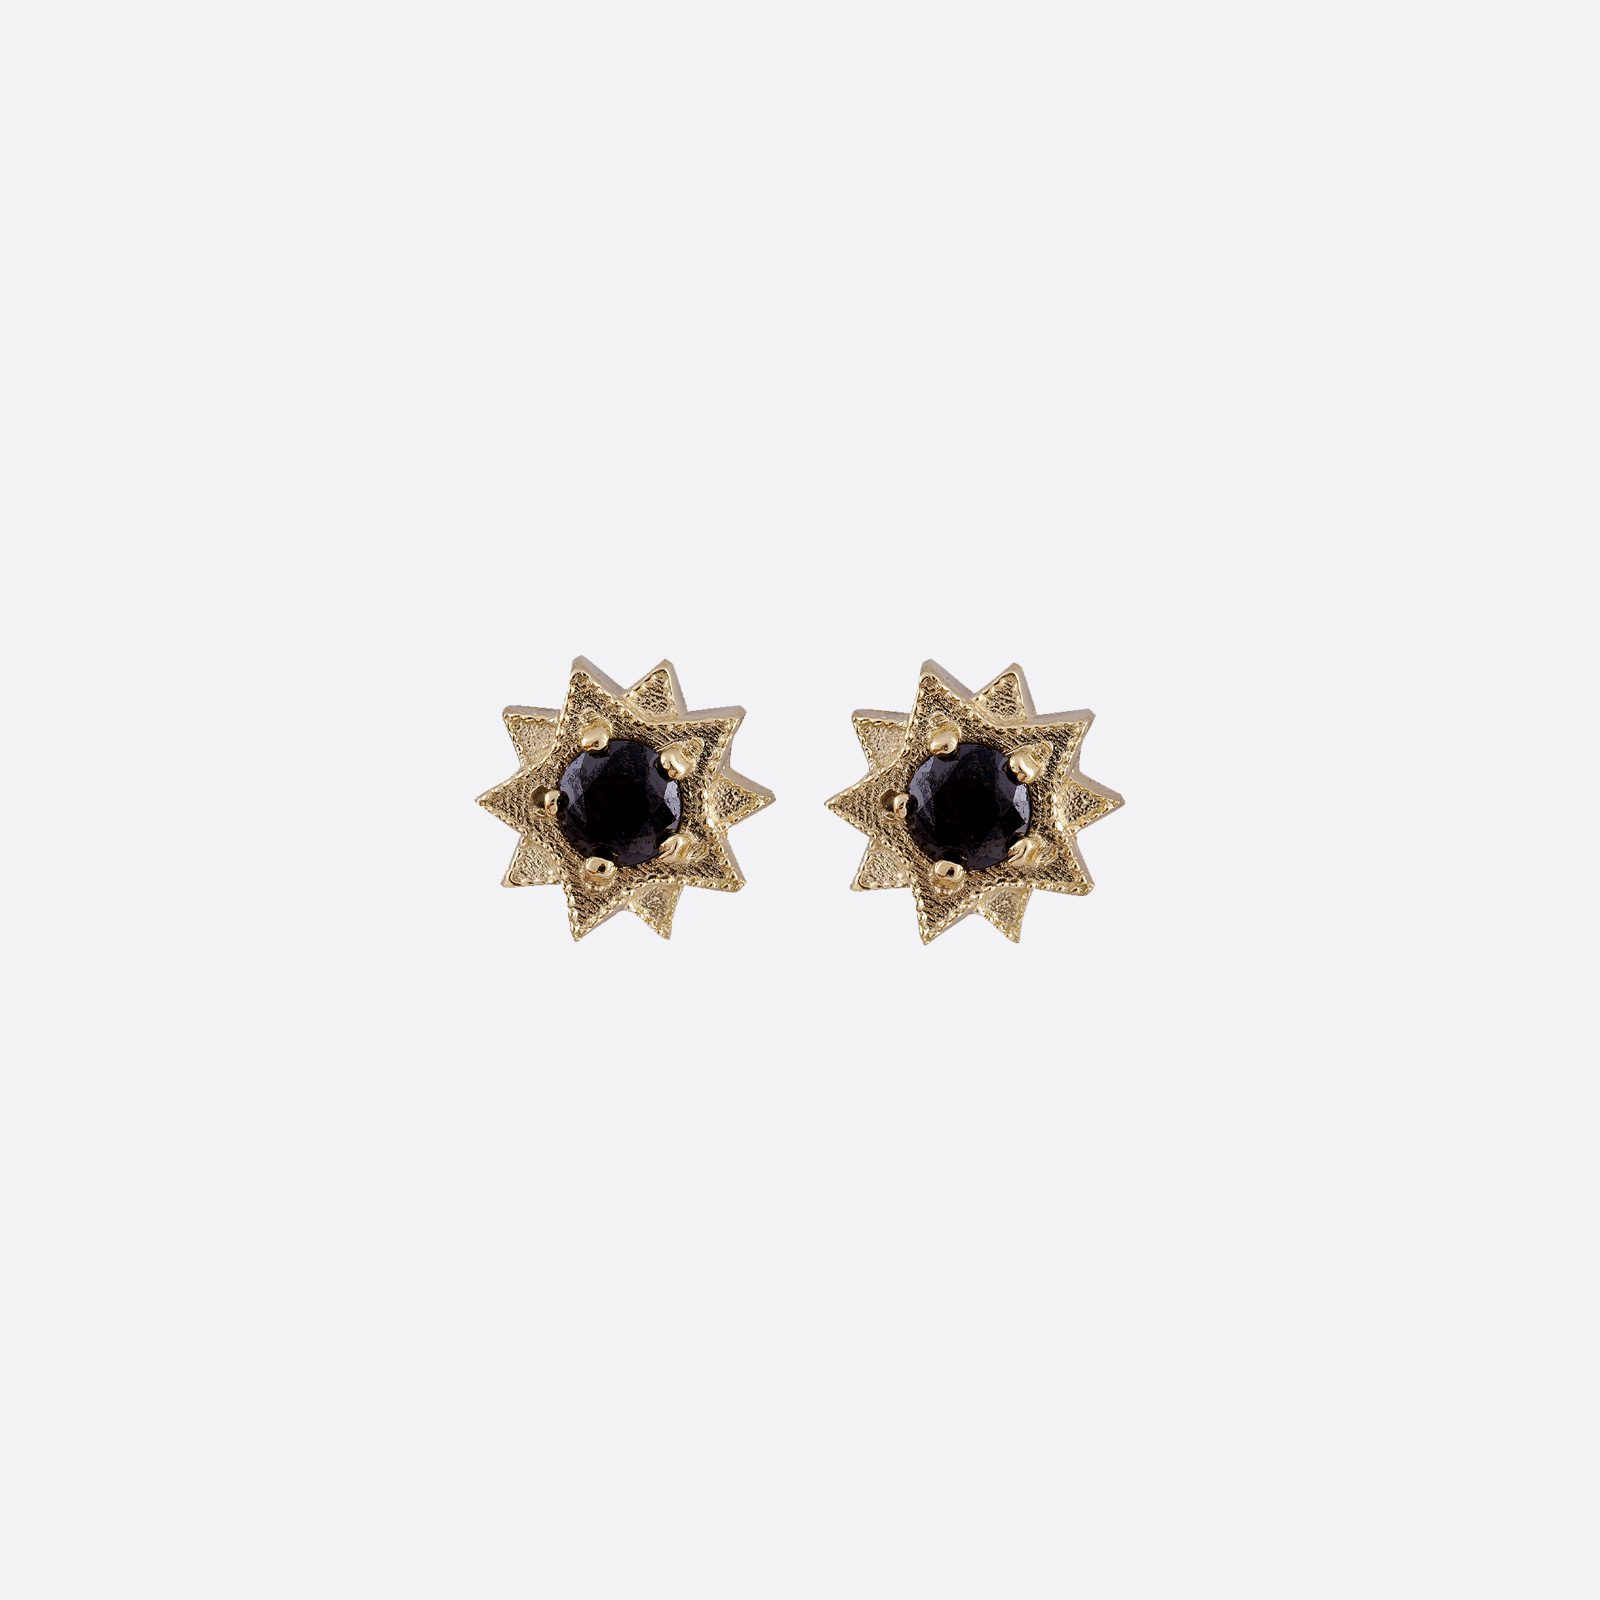 Large Clip Earring With Black Diamond And Crystal Multi-Stones - Michael  Nash Jewelry